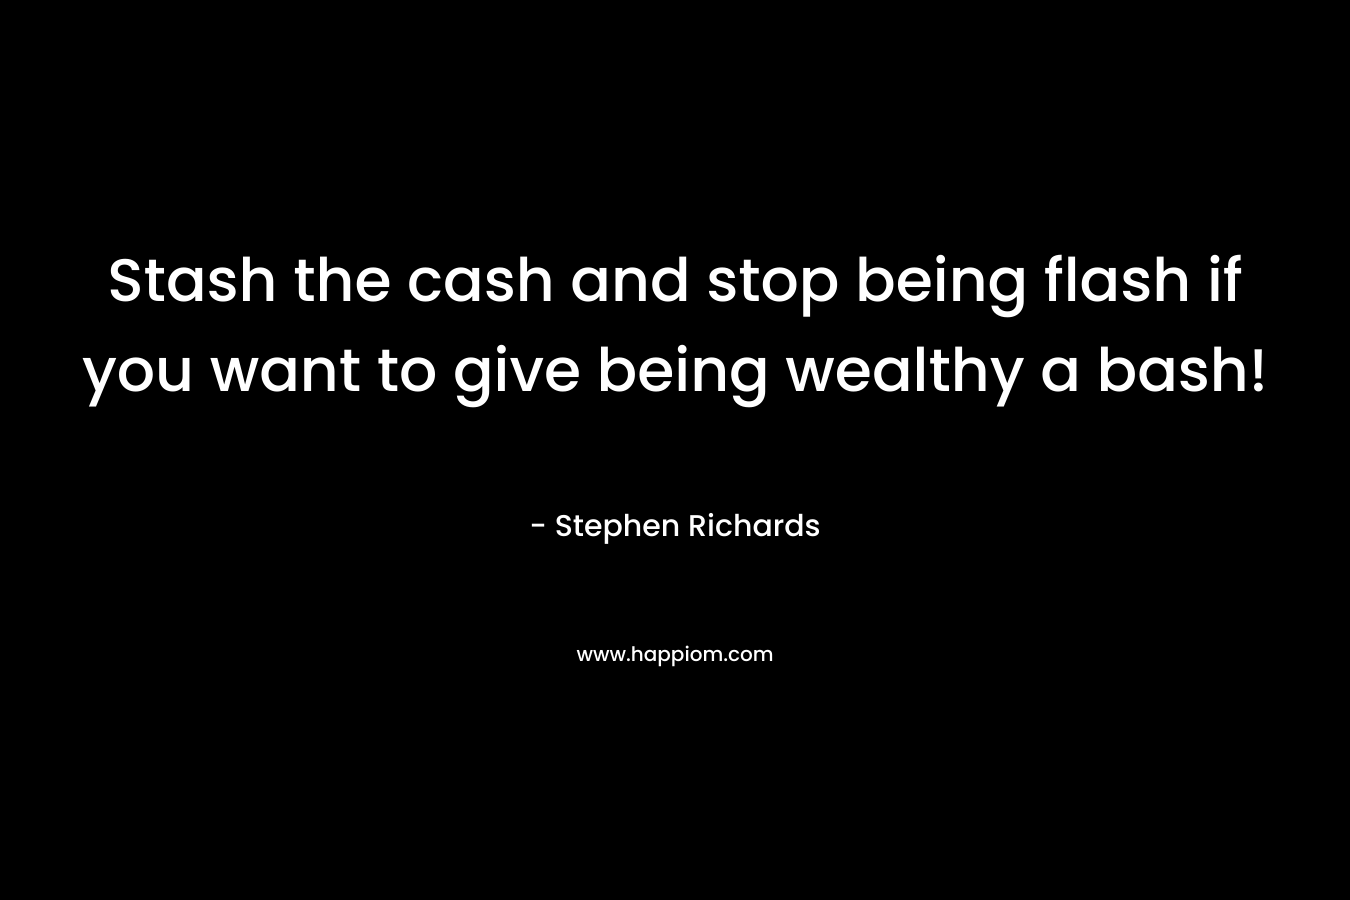 Stash the cash and stop being flash if you want to give being wealthy a bash!